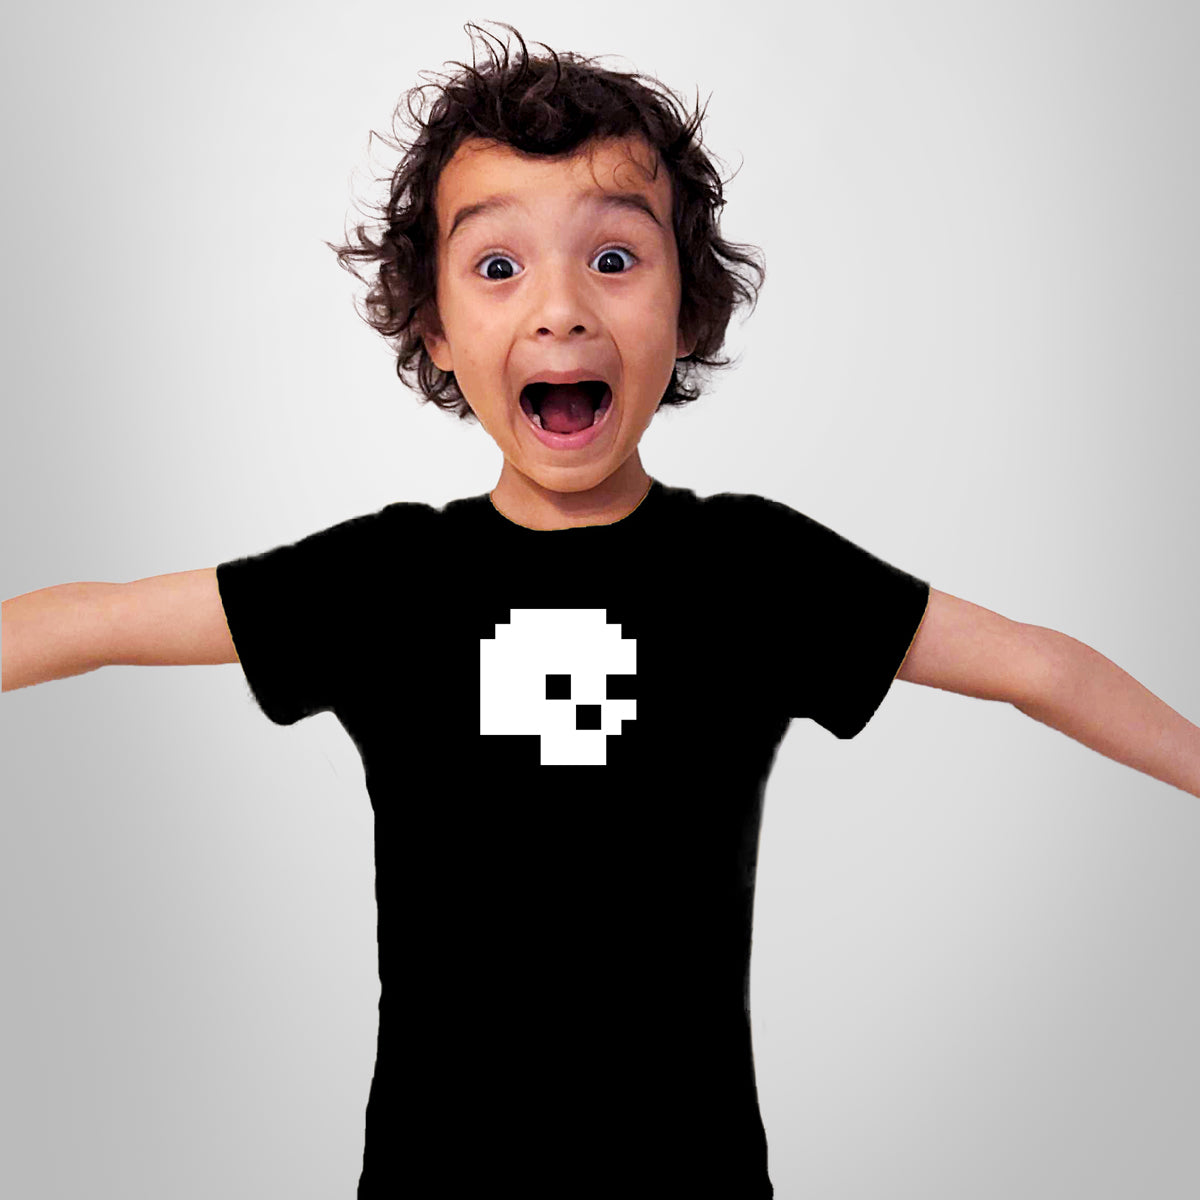 A&S - Pixel Skull Youth Jersey Tee